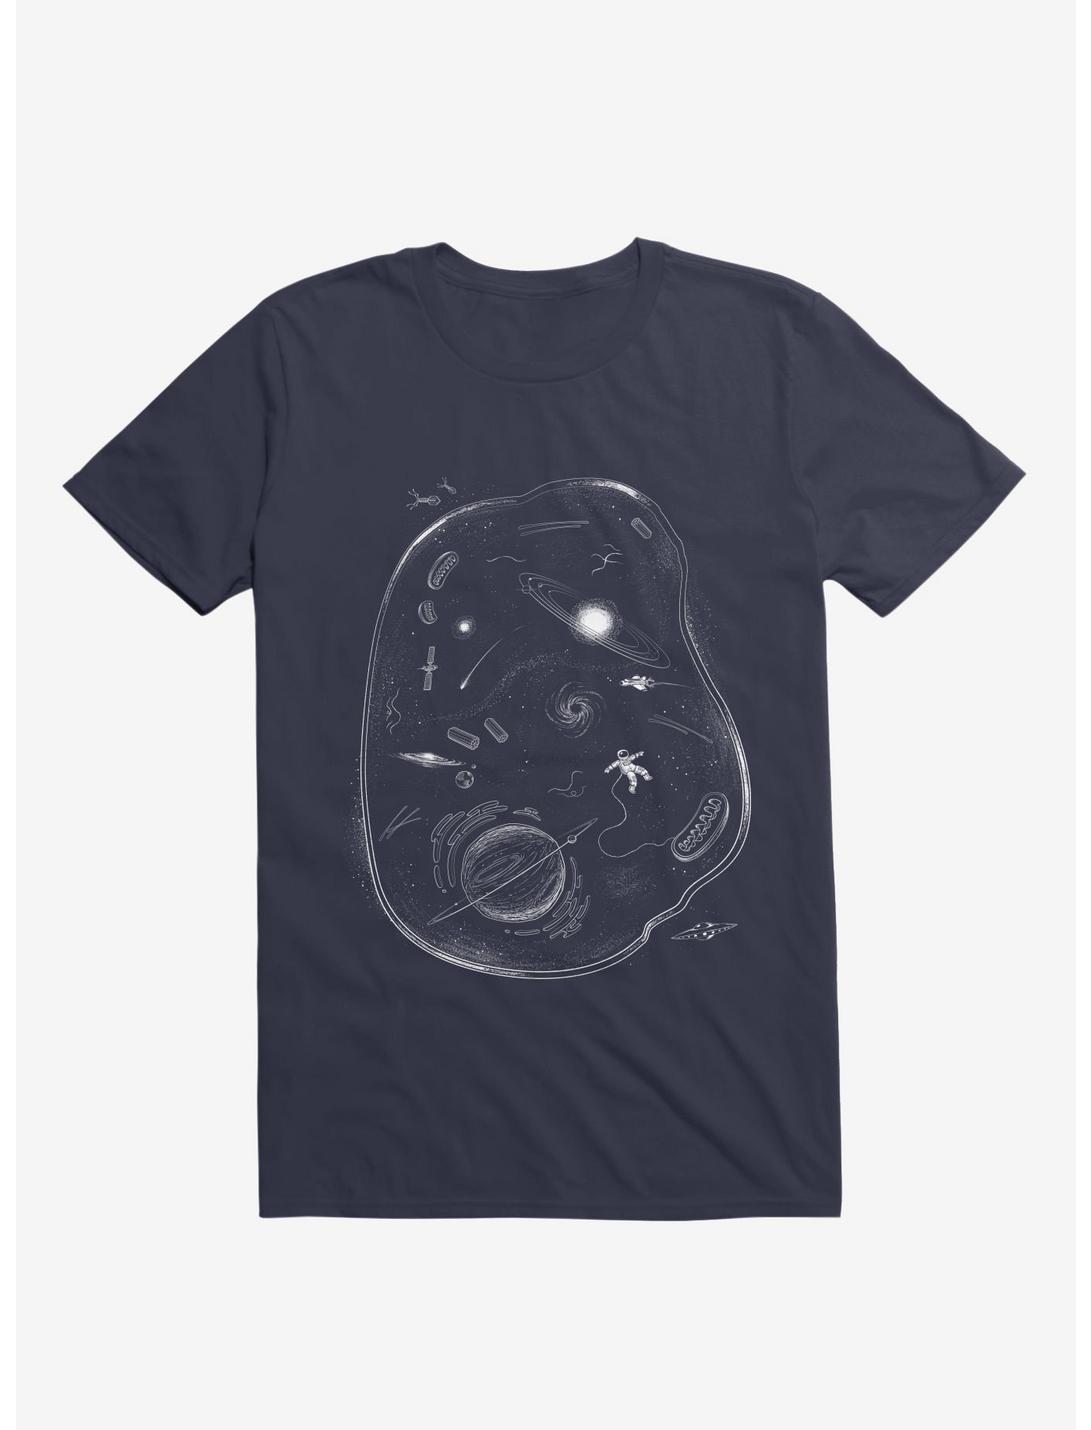 We Are Made Of Stars Navy Blue T-Shirt, NAVY, hi-res